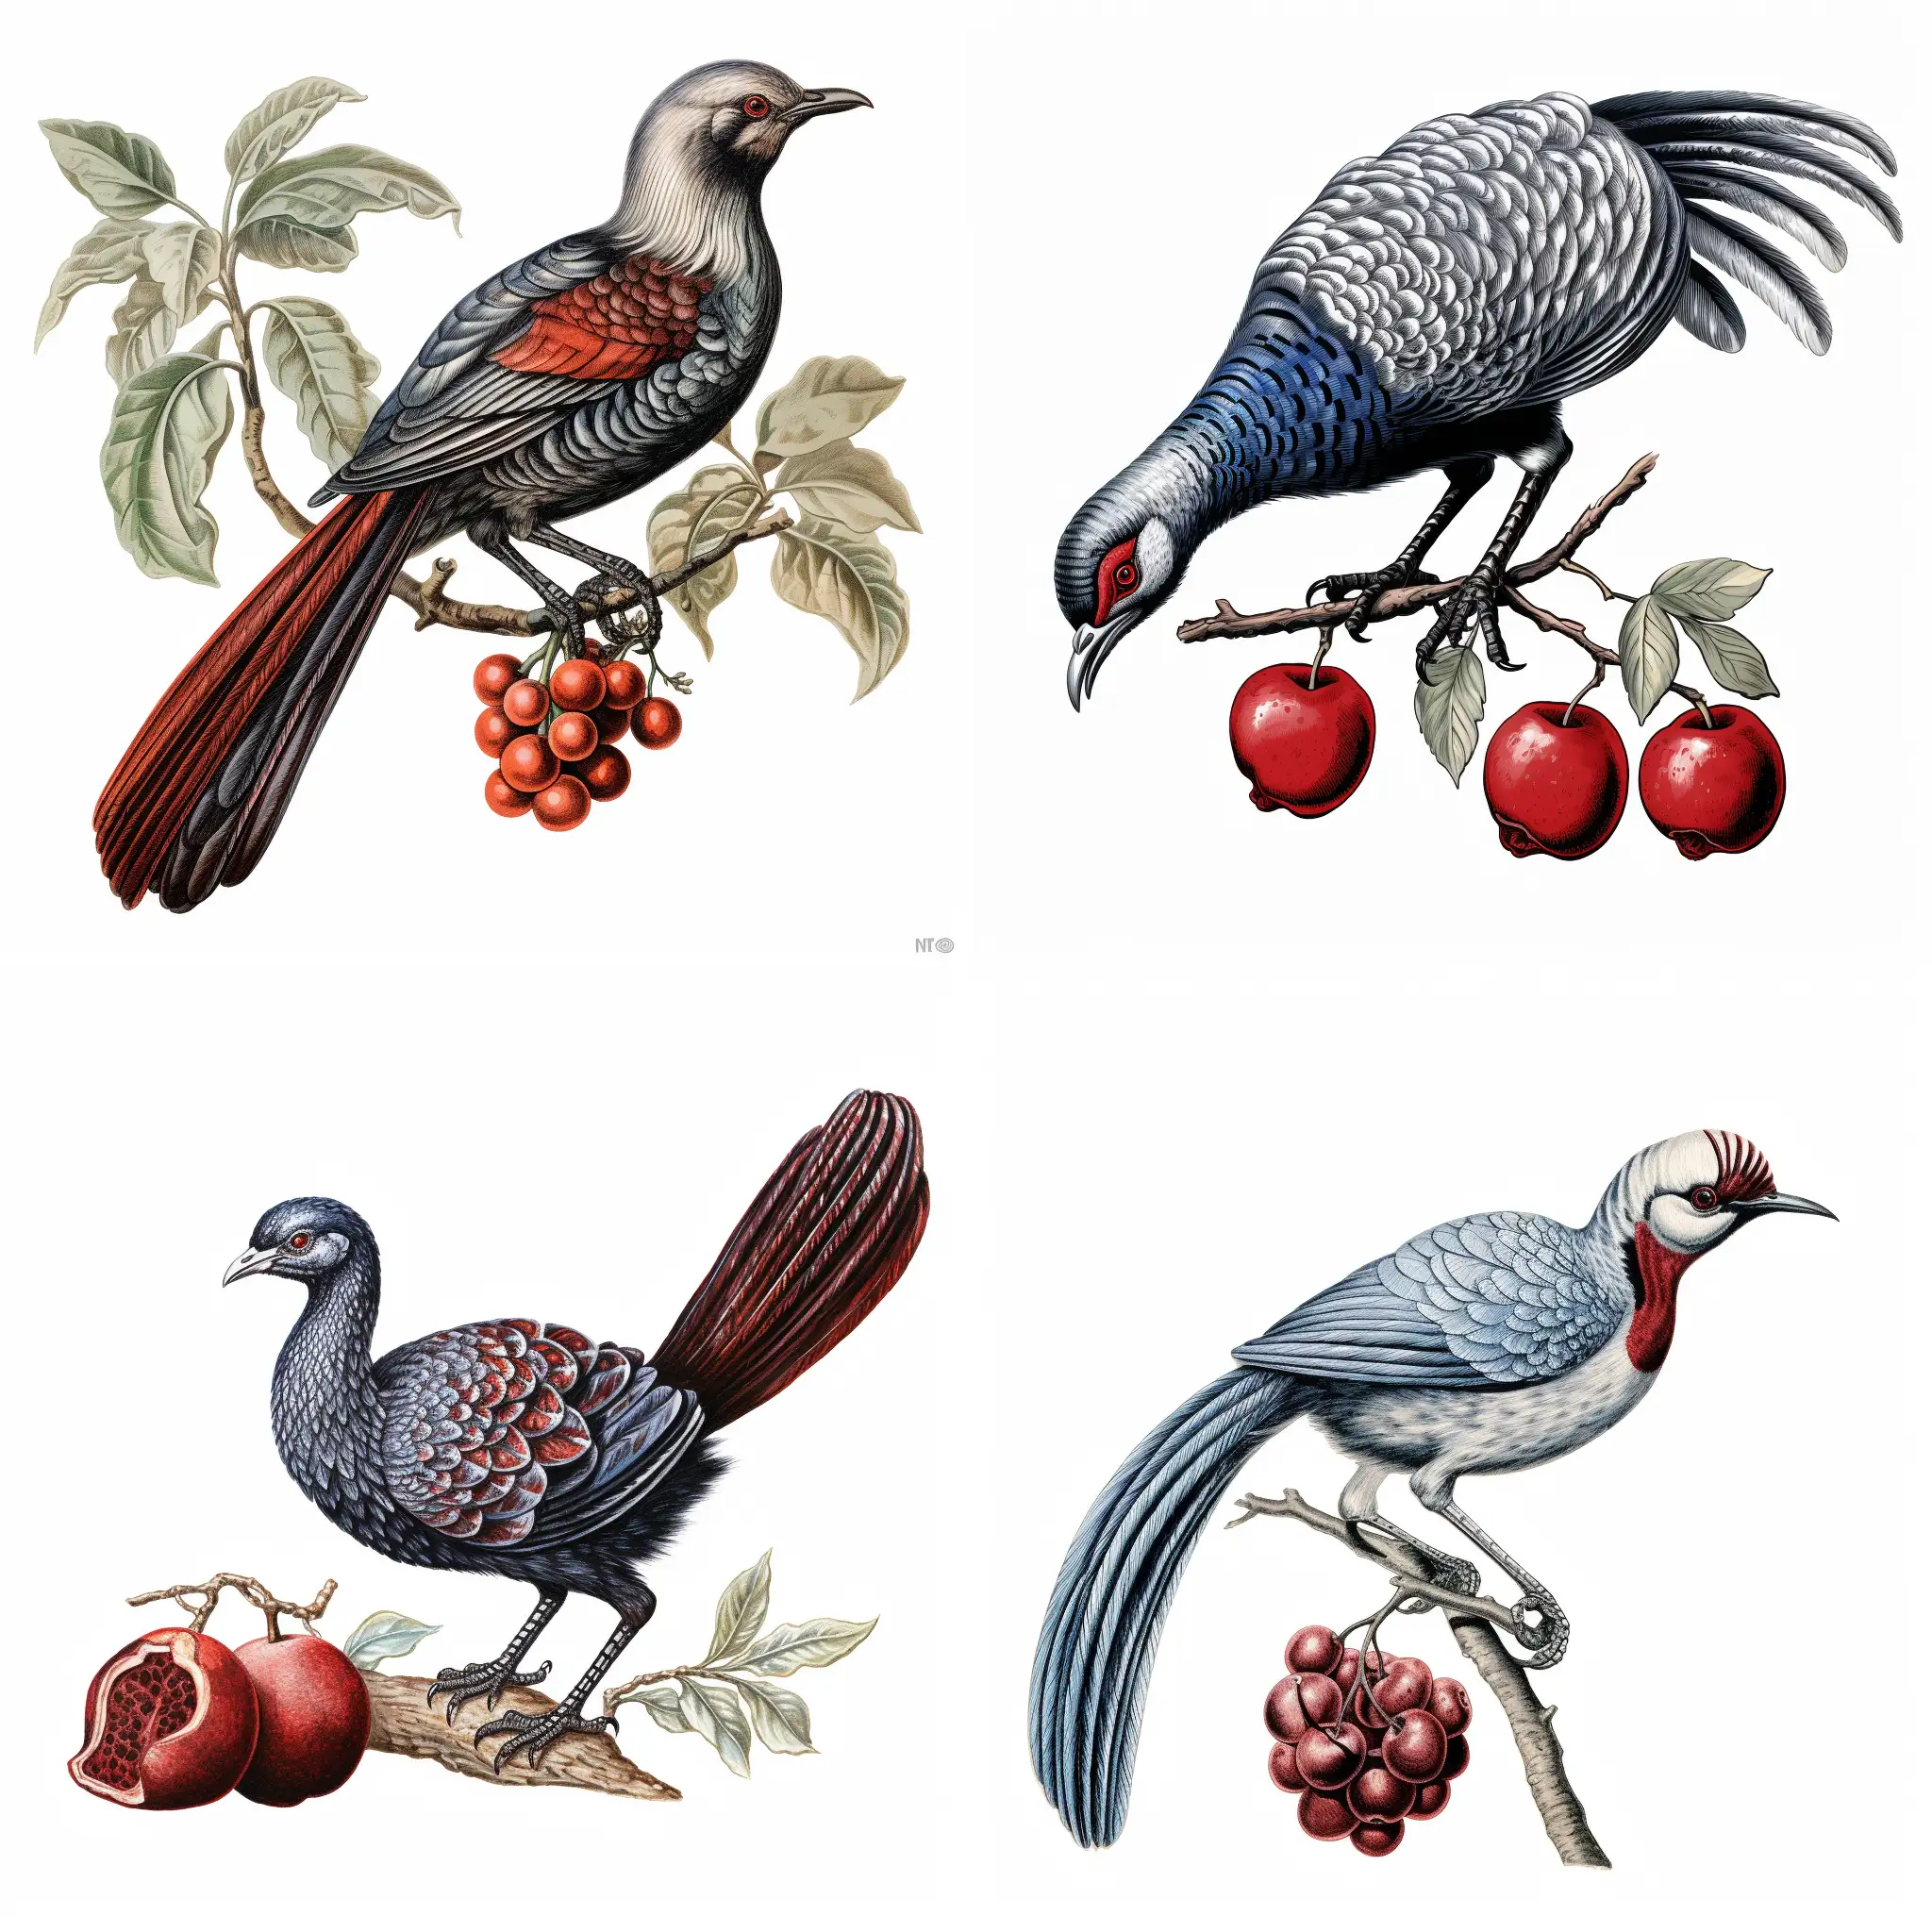 I need a logo illustrating a silver pheasant is eating a hazel nut